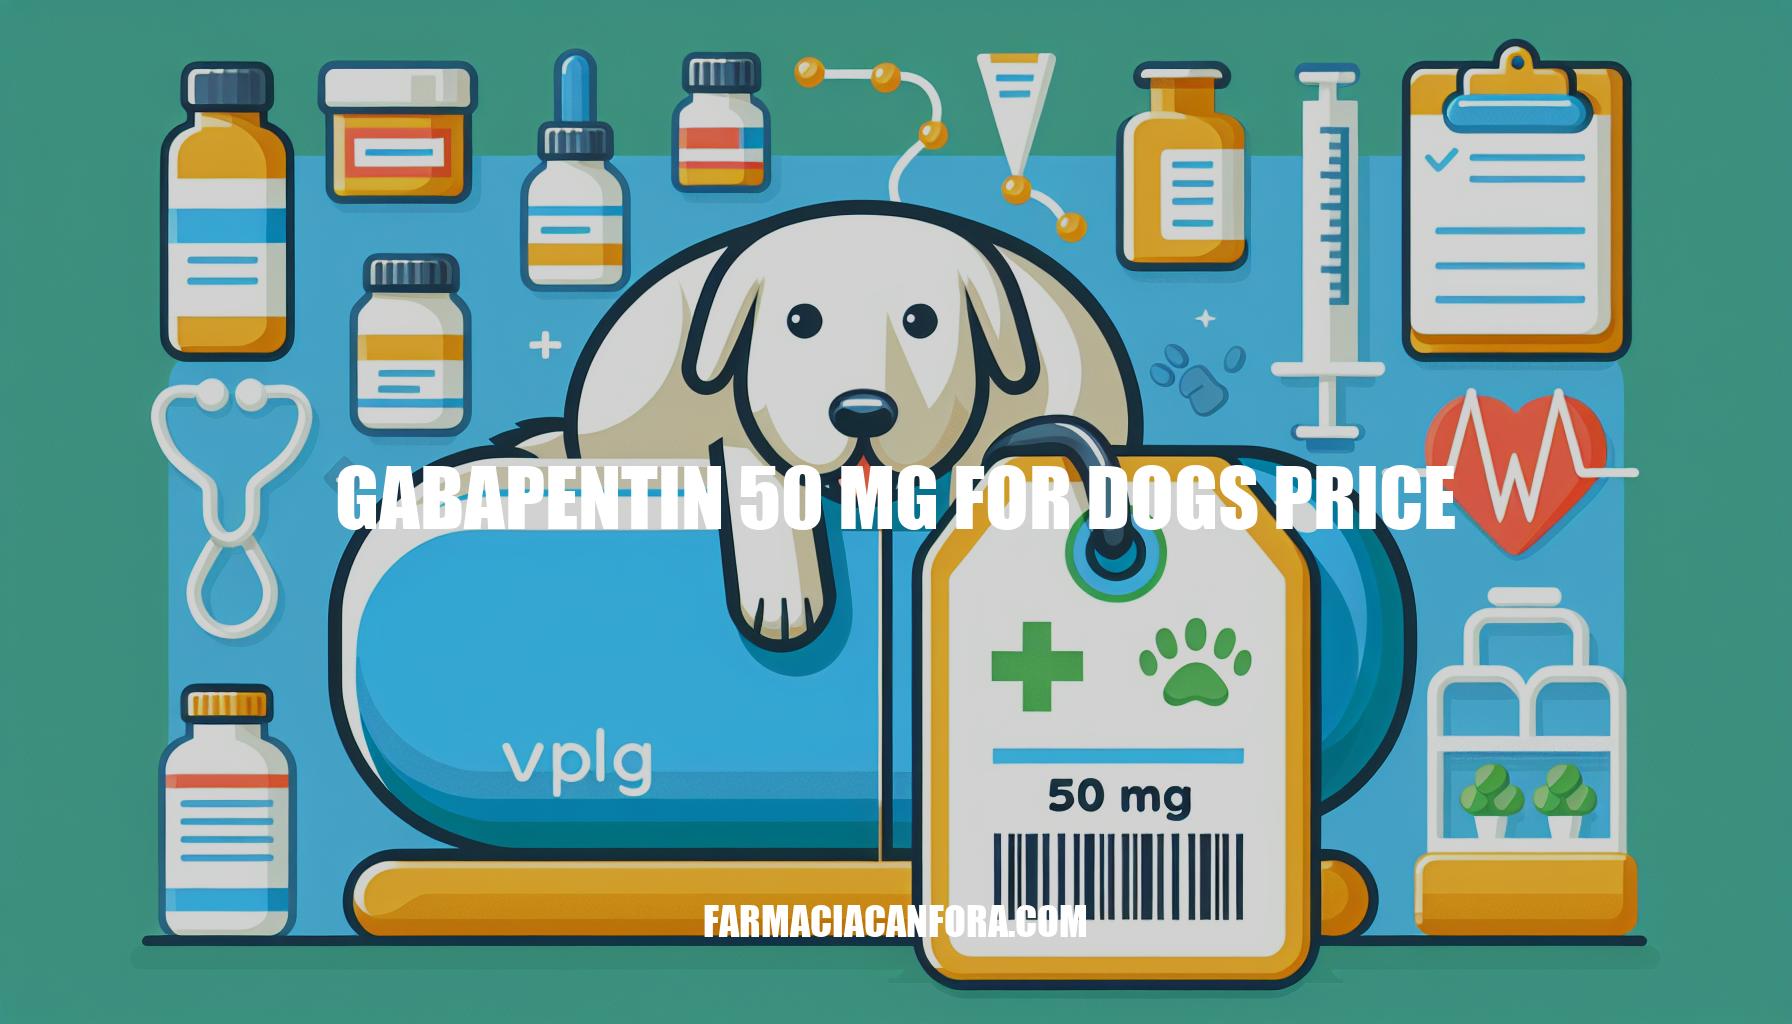 Gabapentin 50 mg for Dogs Price: A Comprehensive Guide